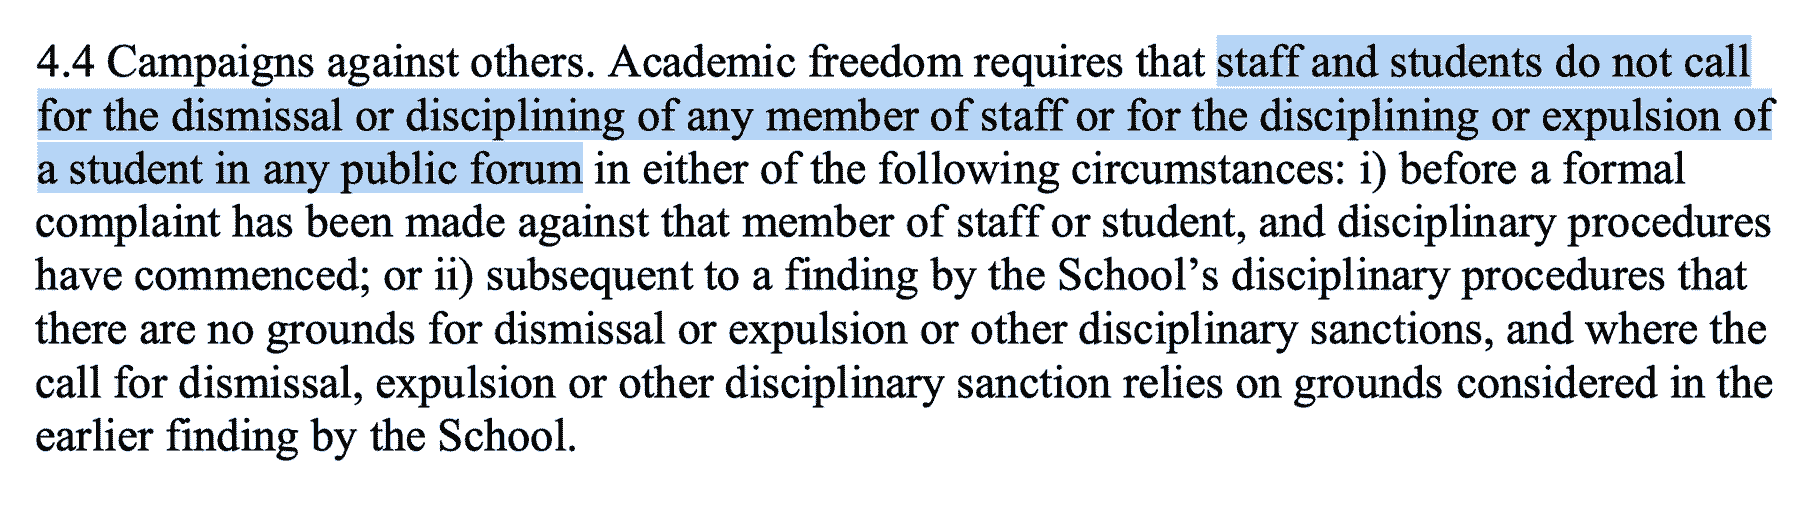 4.4 Campaigns against others. Academic freedom requires that staff and students do not call for the dismissal or disciplining of any member of staff or for the disciplining or expulsion of a student in any public forum in either of the following circumstances: i) before a formal complaint has been made against that member of staff or student, and disciplinary procedures have commenced; or ii) subsequent to a finding by the School’s disciplinary procedures that there are no grounds for dismissal or expulsion or other disciplinary sanctions, and where the call for dismissal, expulsion or other disciplinary sanction relies on grounds considered in the earlier finding by the School.